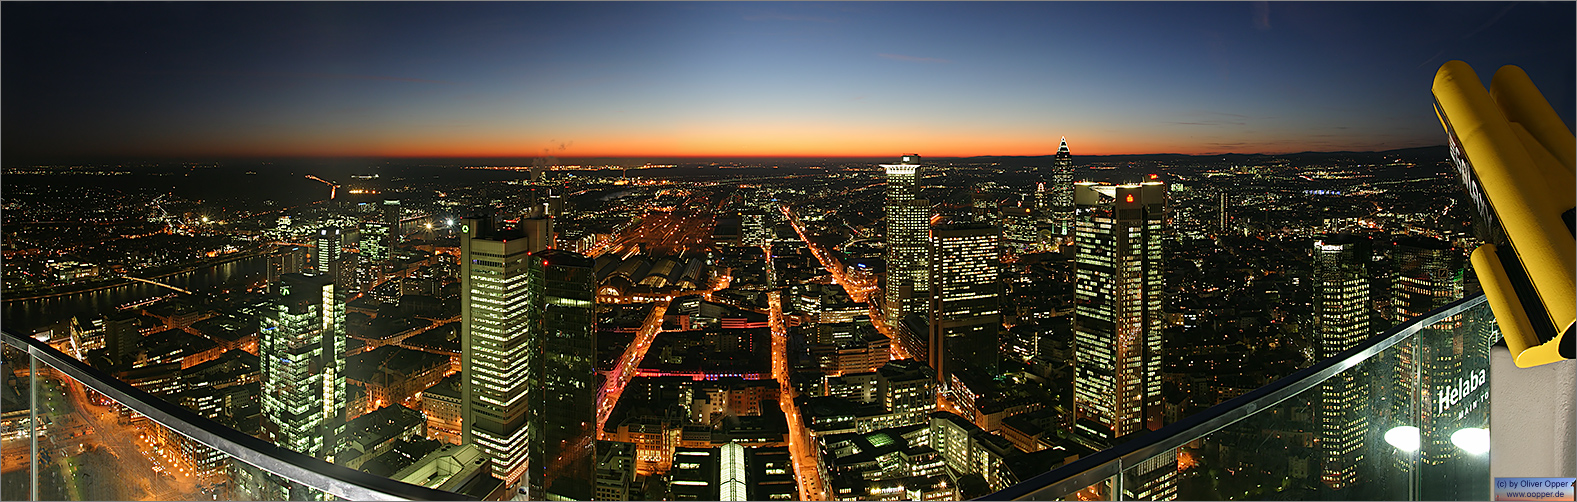 Panorama Frankfurt - Maintower - p051 - (c) by Oliver Opper